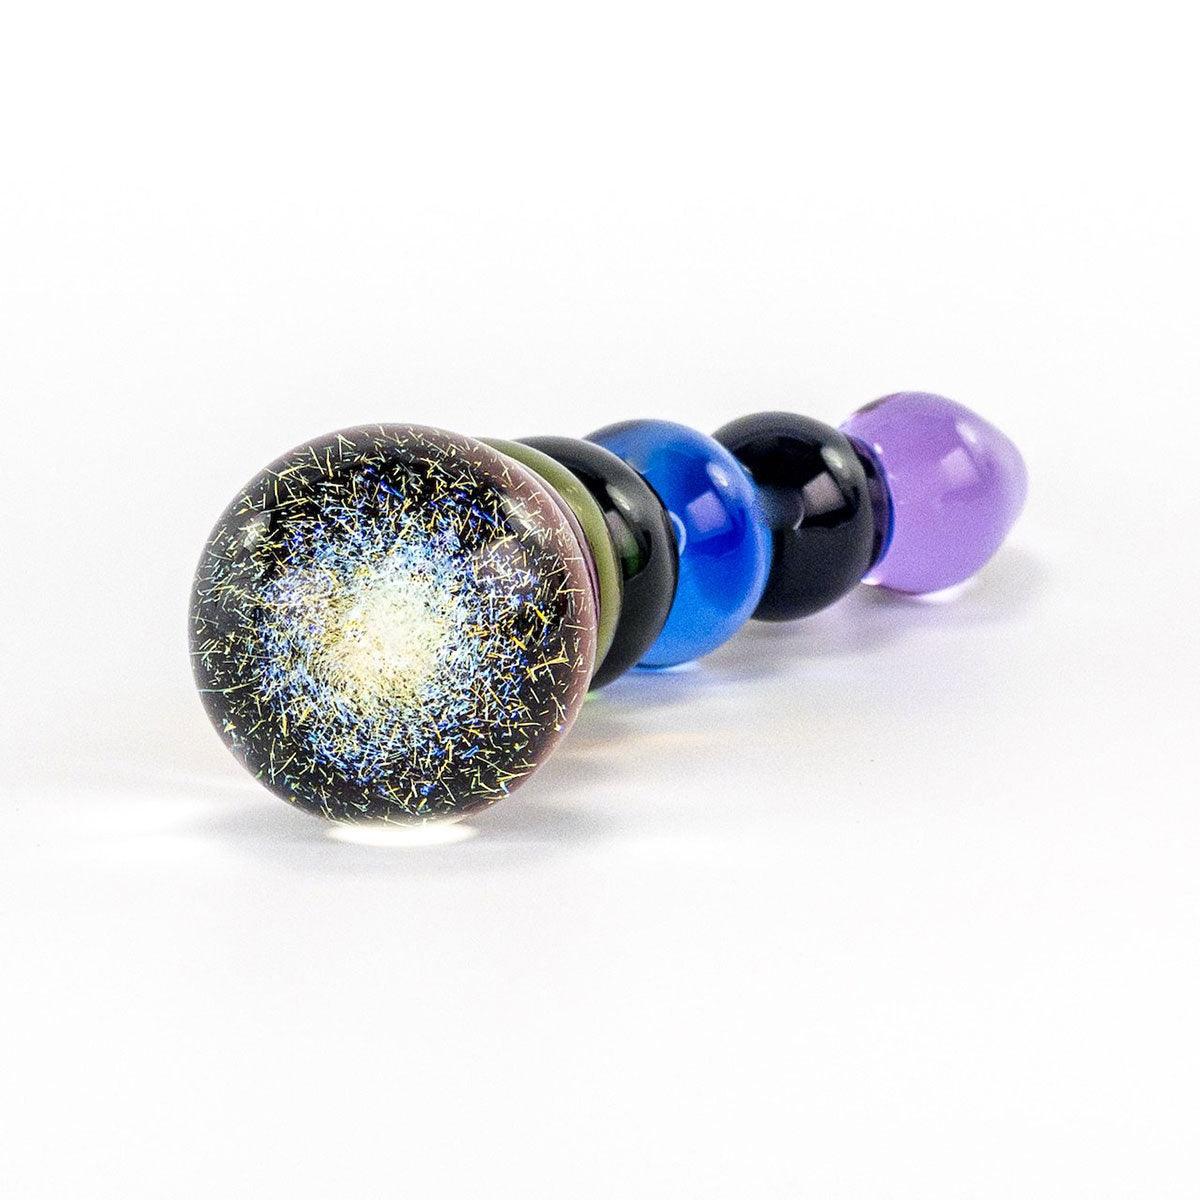 Crystal Delights Rainbow Bubble Dil with Dichroic Bulb - shop enby